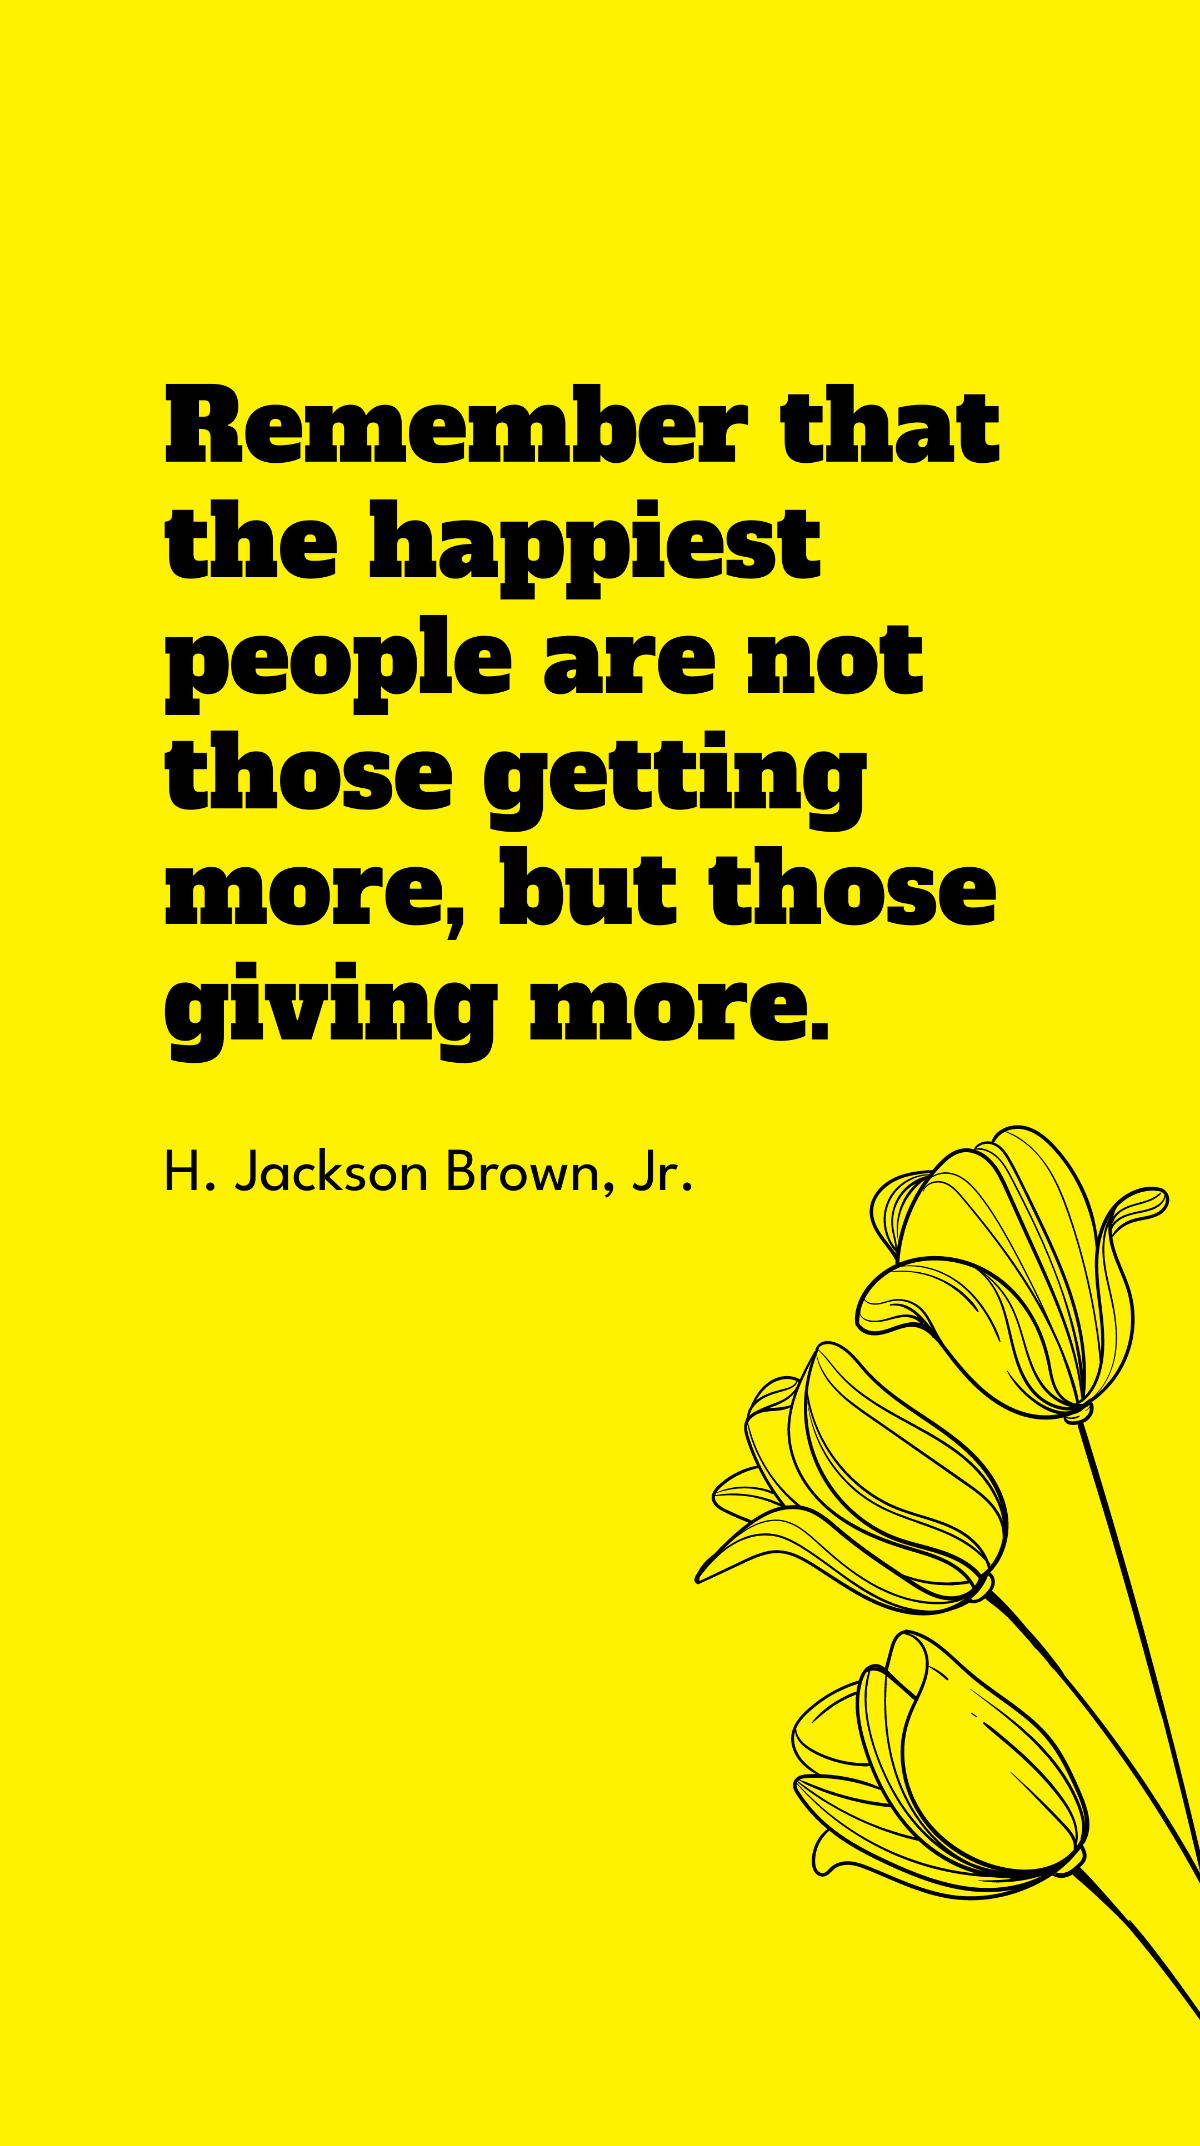 H. Jackson Brown, Jr. - Remember that the happiest people are not those getting more, but those giving more. Template